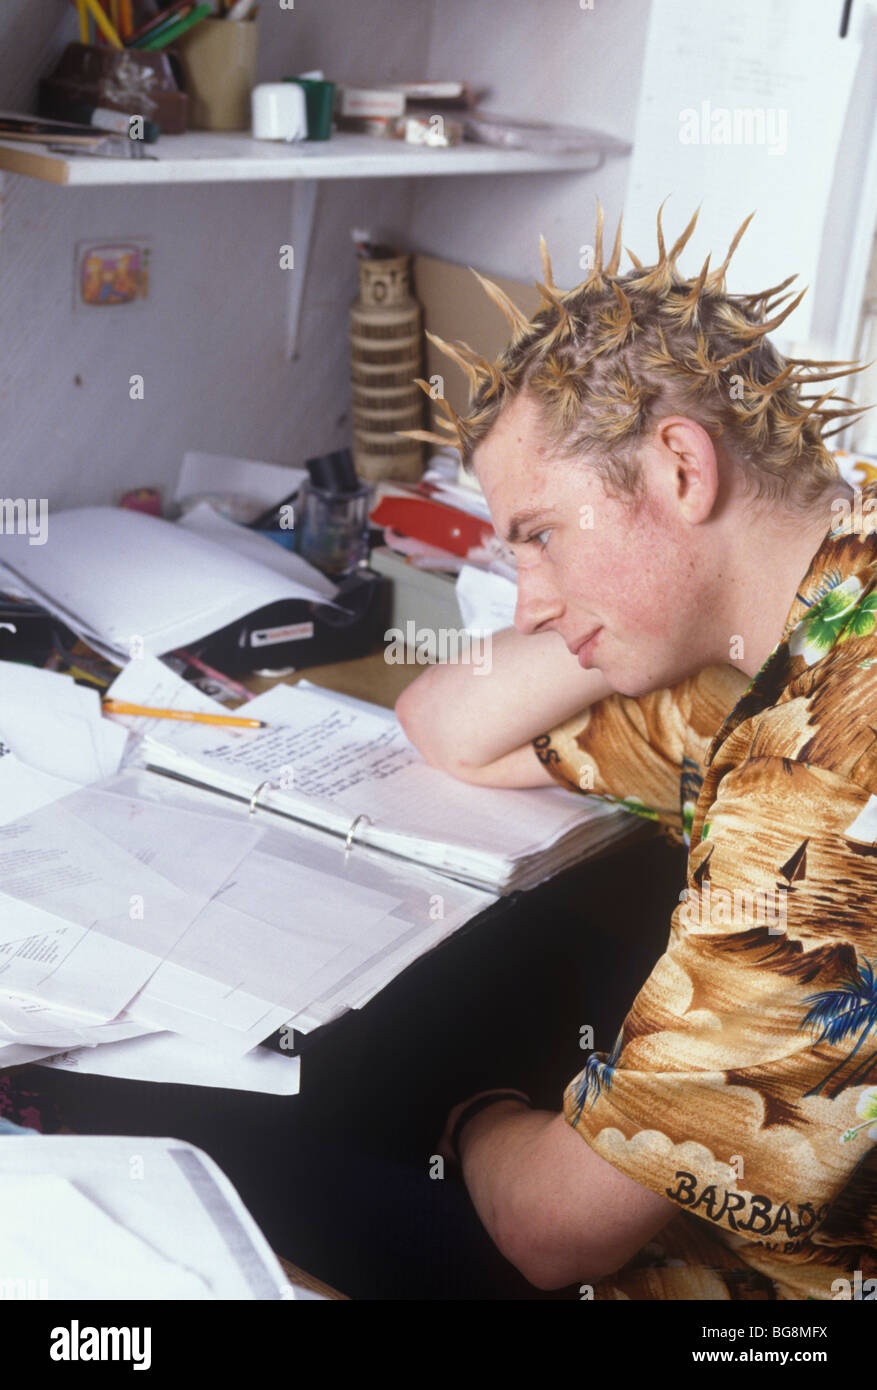 teenage boy with spikey hair style studying Stock Photo